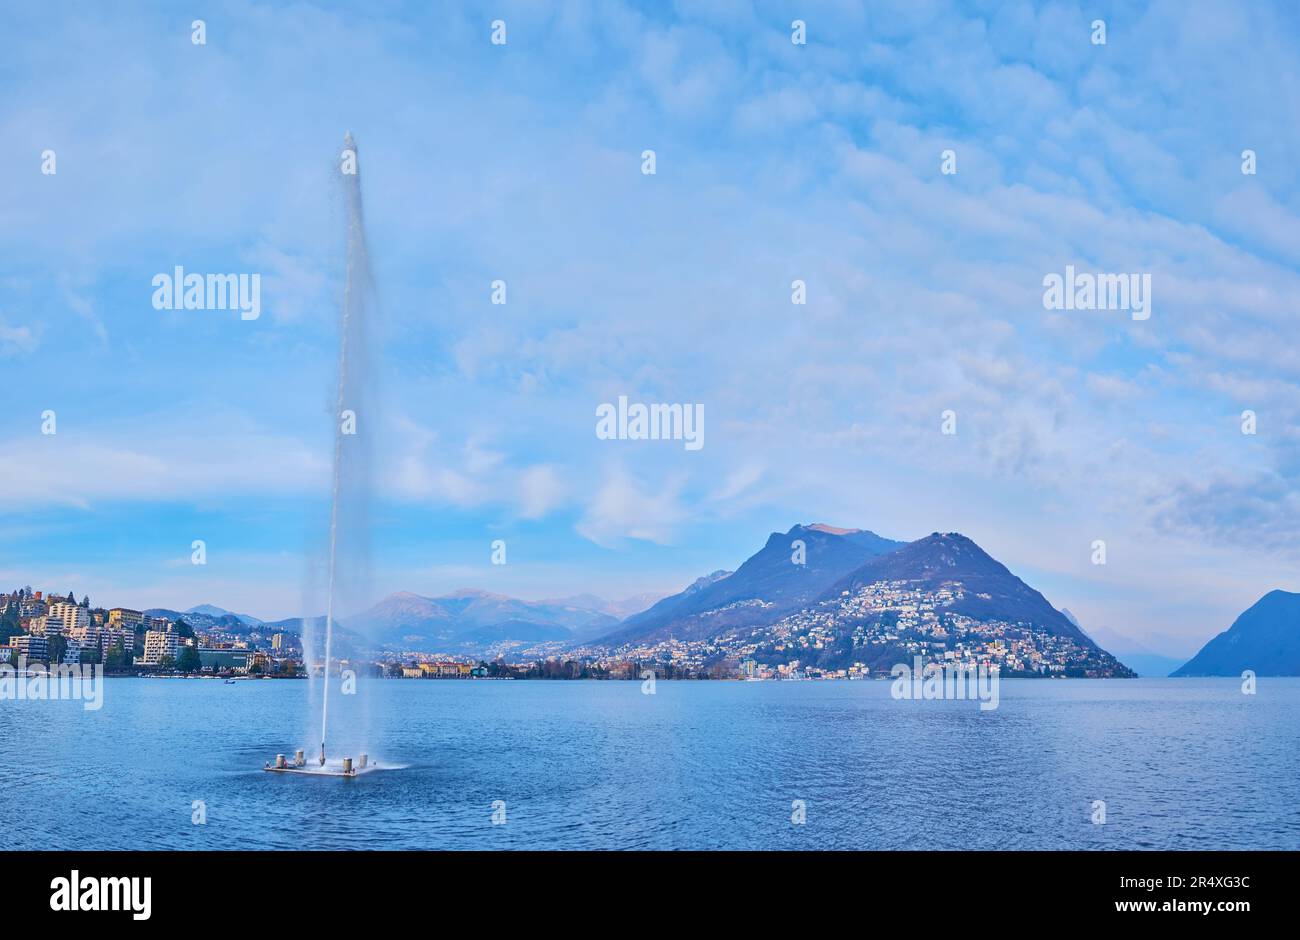 Lake Lugano with Getto d'Acqua fountain (Water Jet on the bay of Lugano, Water Jet of Paradiso) and Monte Bre in background, Lugano, Switzerland Stock Photo